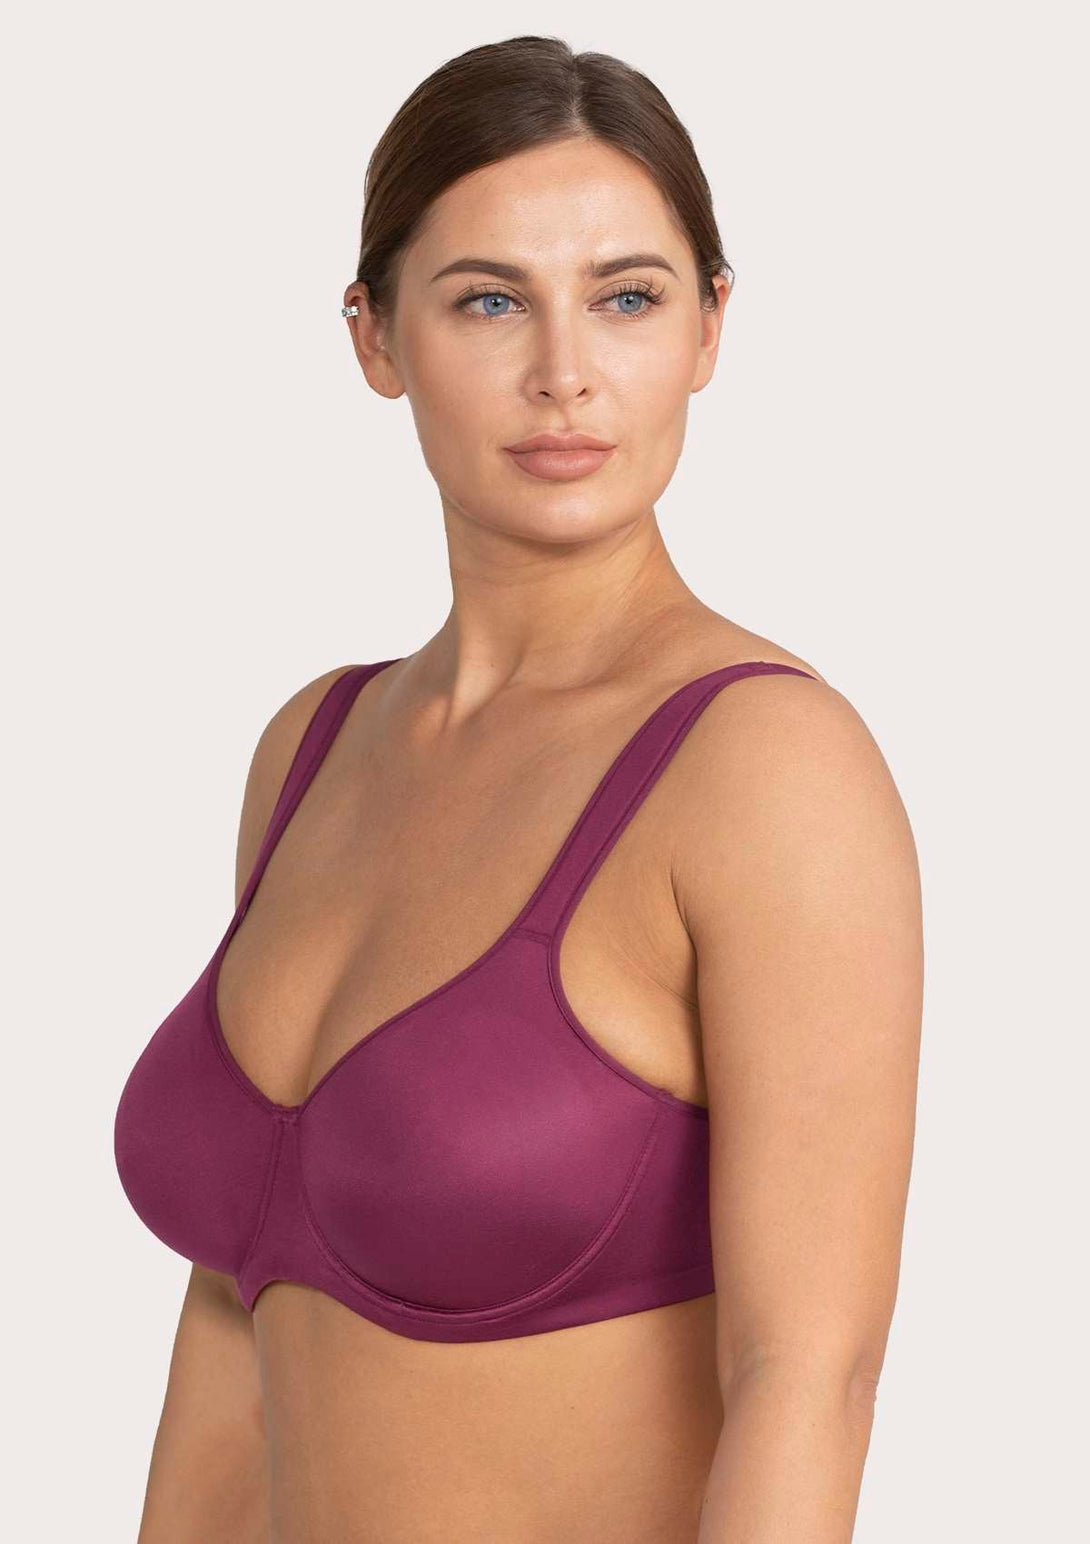 HSIA HSIA Red Unlined Full Coverage Minimizer Bra